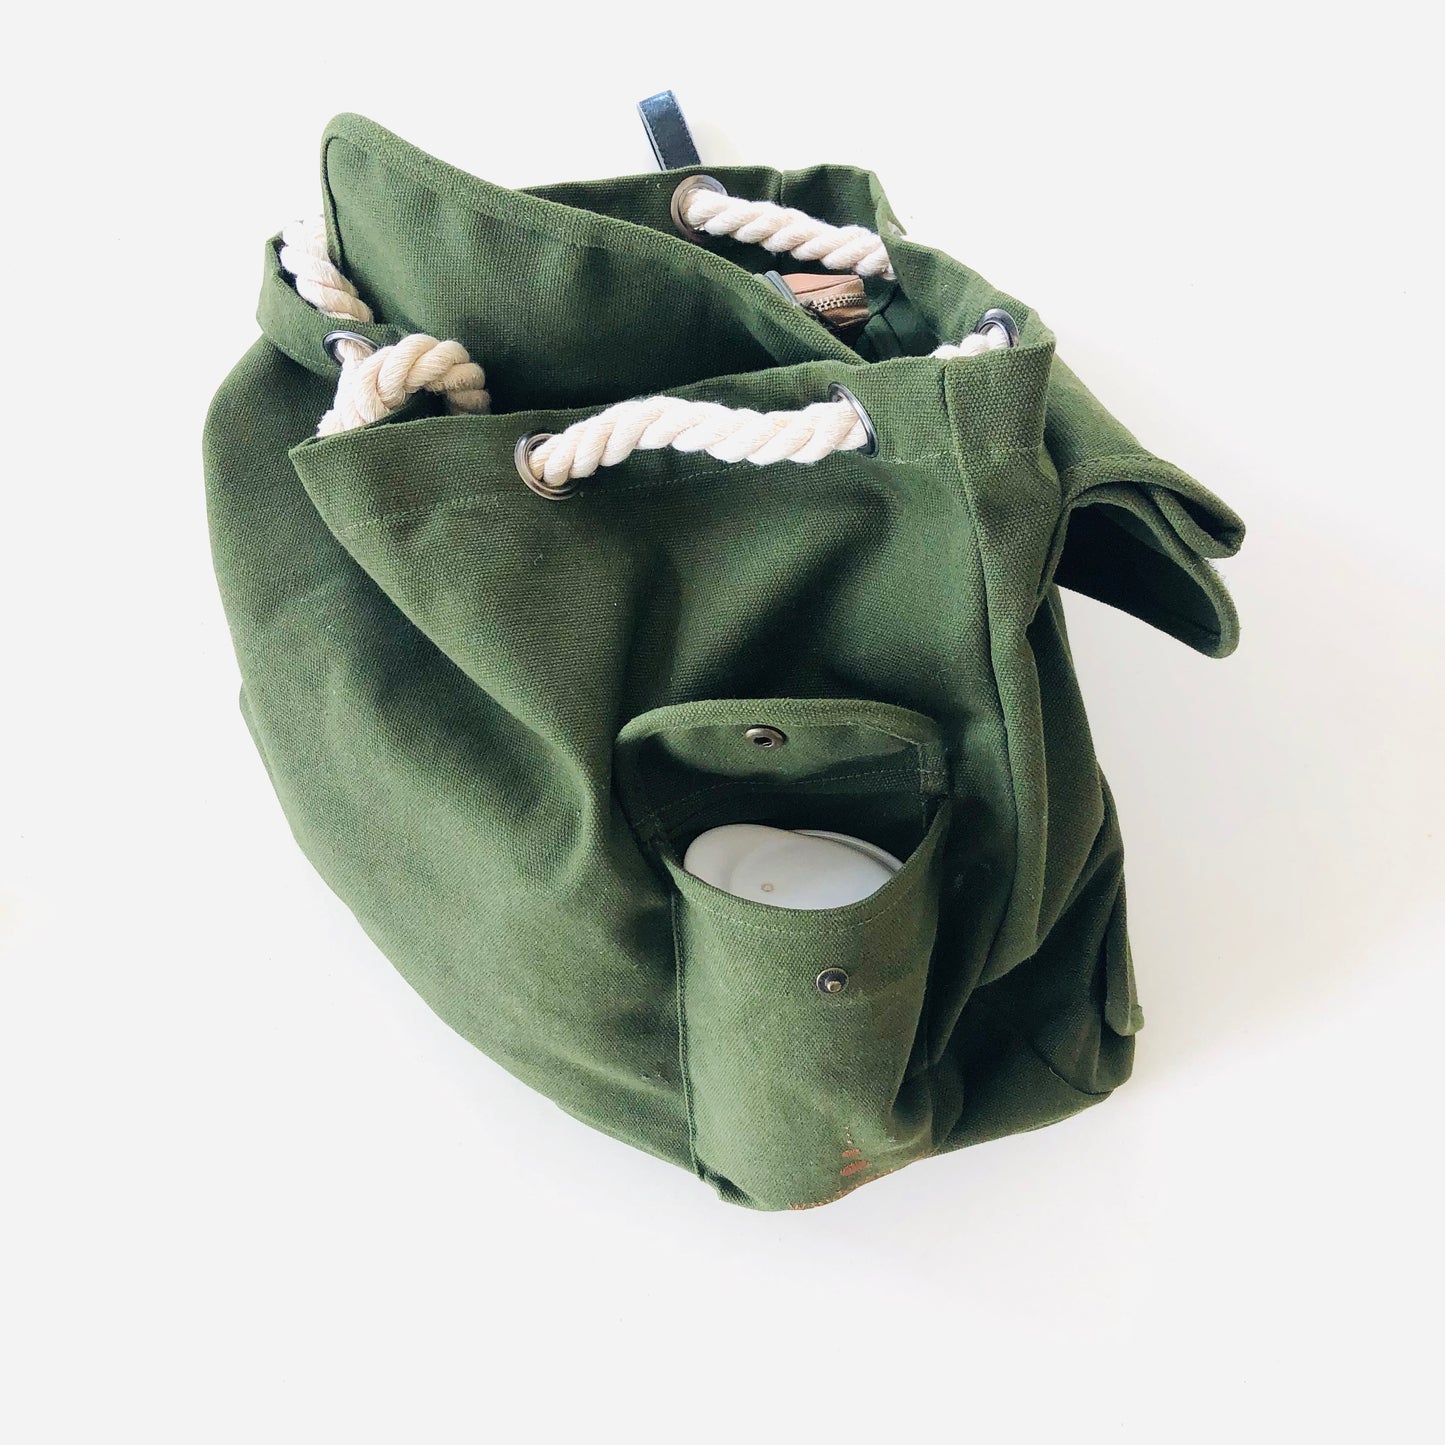 The SOL WANDERER replacement recycled canvas bag with velcro - replacement cart bag.